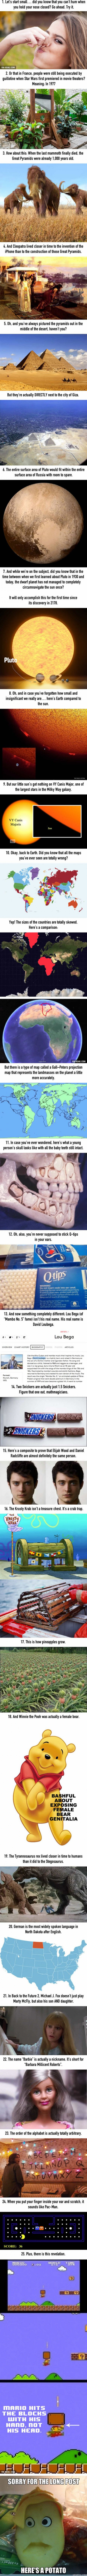 25 Facts That Will Absolutely Blow Your Mind